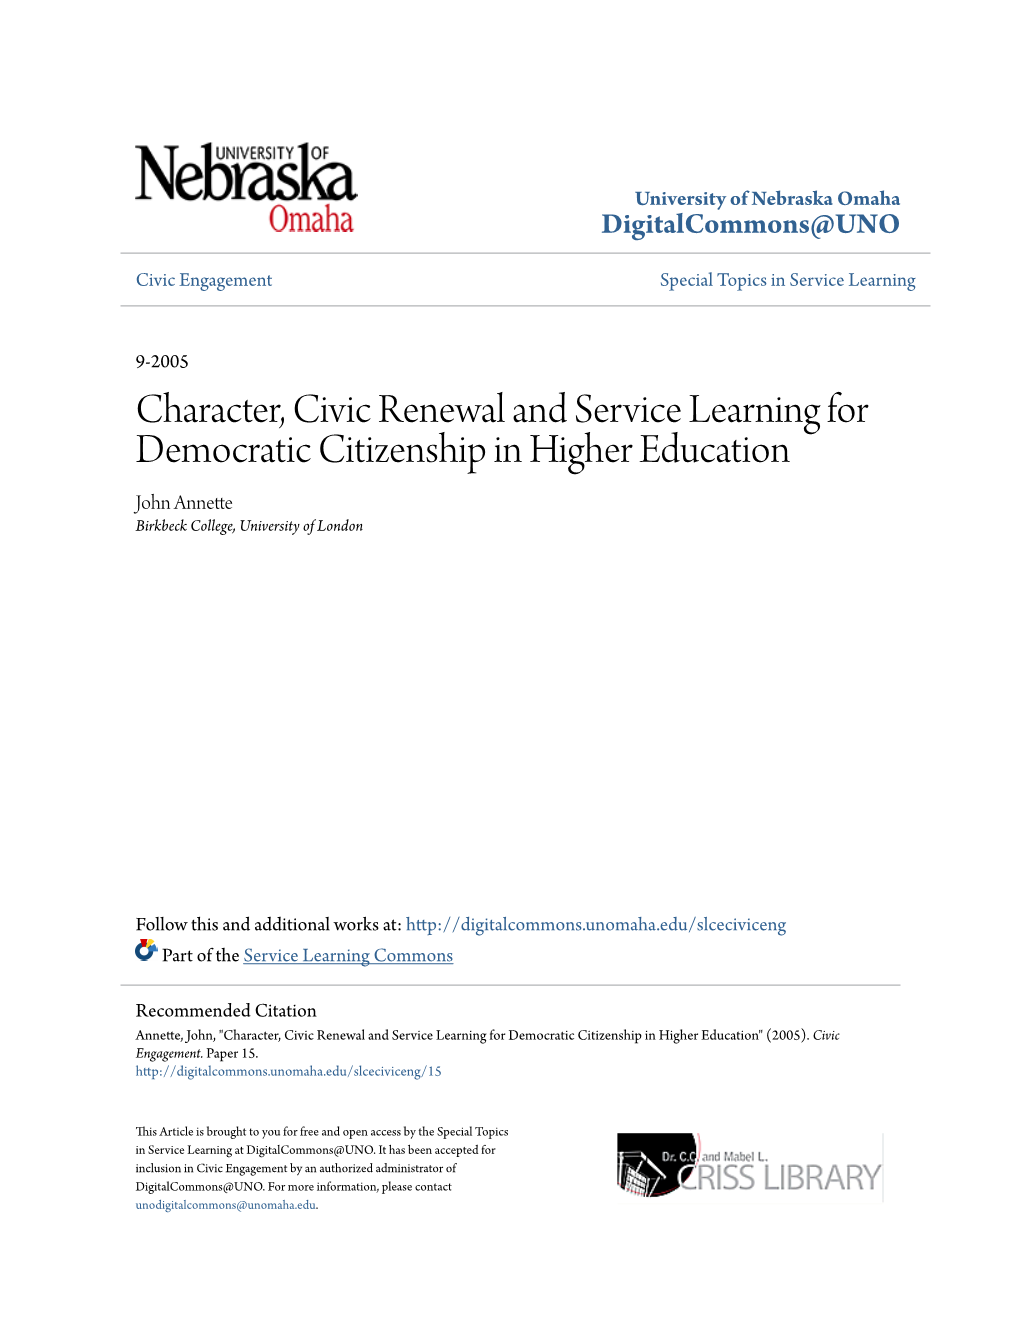 Character, Civic Renewal and Service Learning for Democratic Citizenship in Higher Education John Annette Birkbeck College, University of London